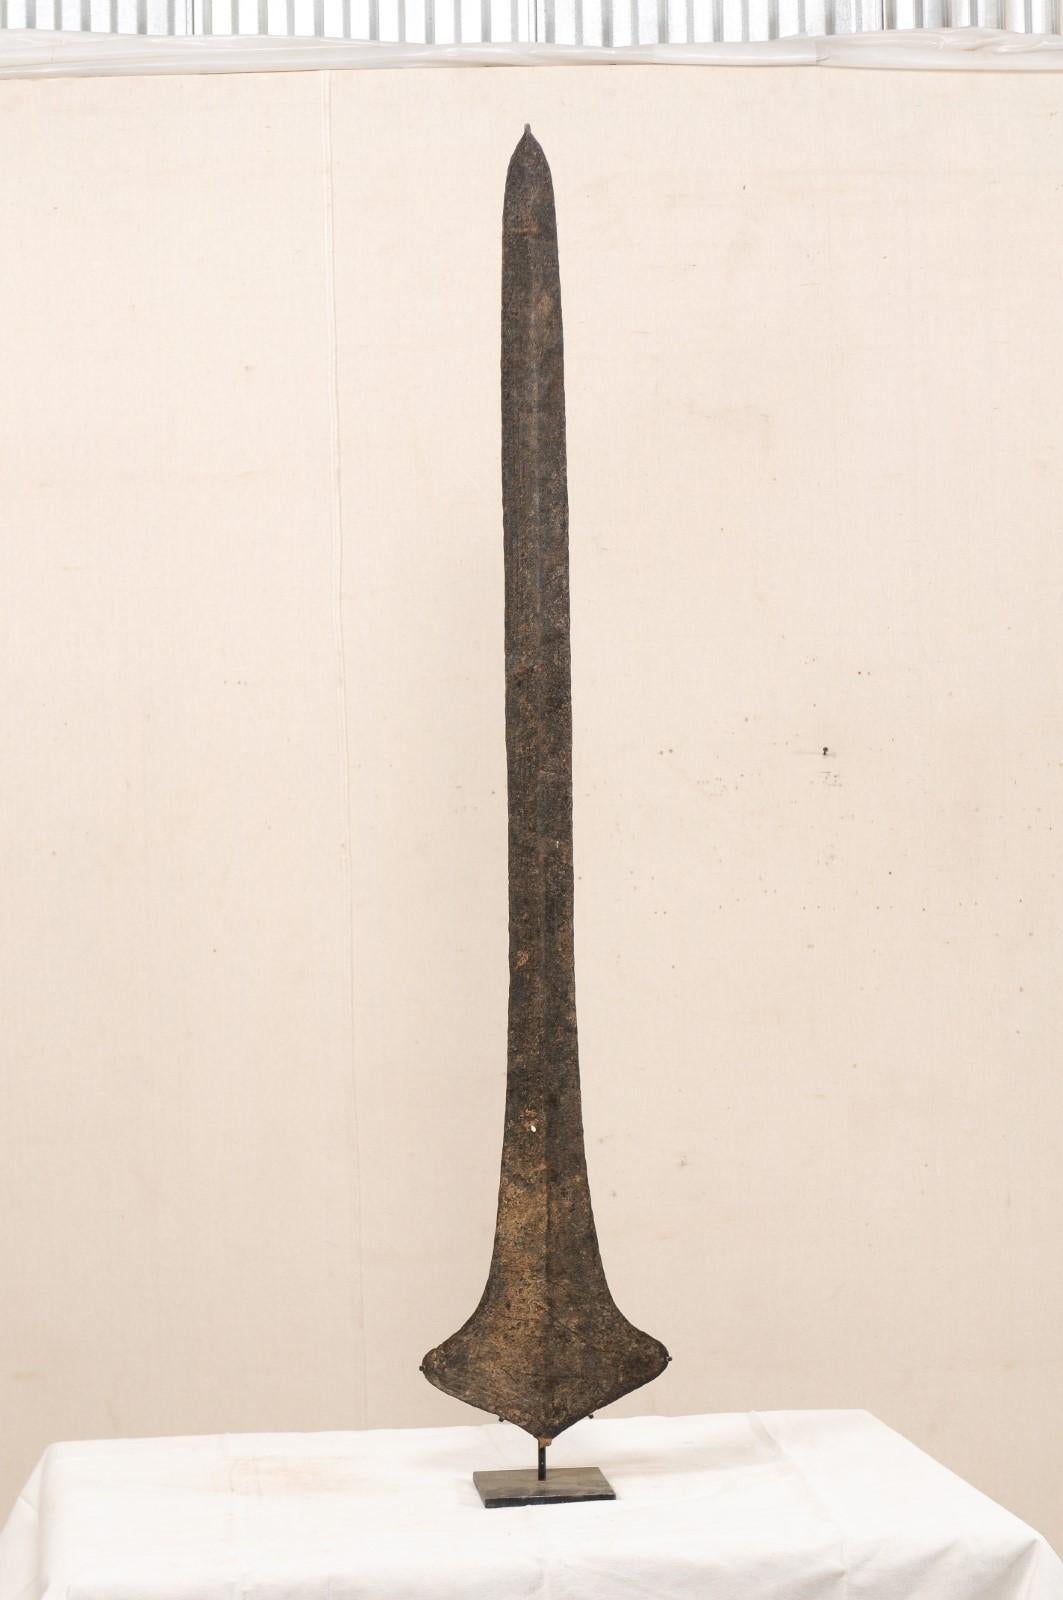 An African iron currency blade or sword currency from the Nkutshu, Topoke & Songo Meno peoples, Democratic Republic of Congo (Zaire) which is nicely presented upon a custom metal stand. Such blades were used by various tribal groups in the